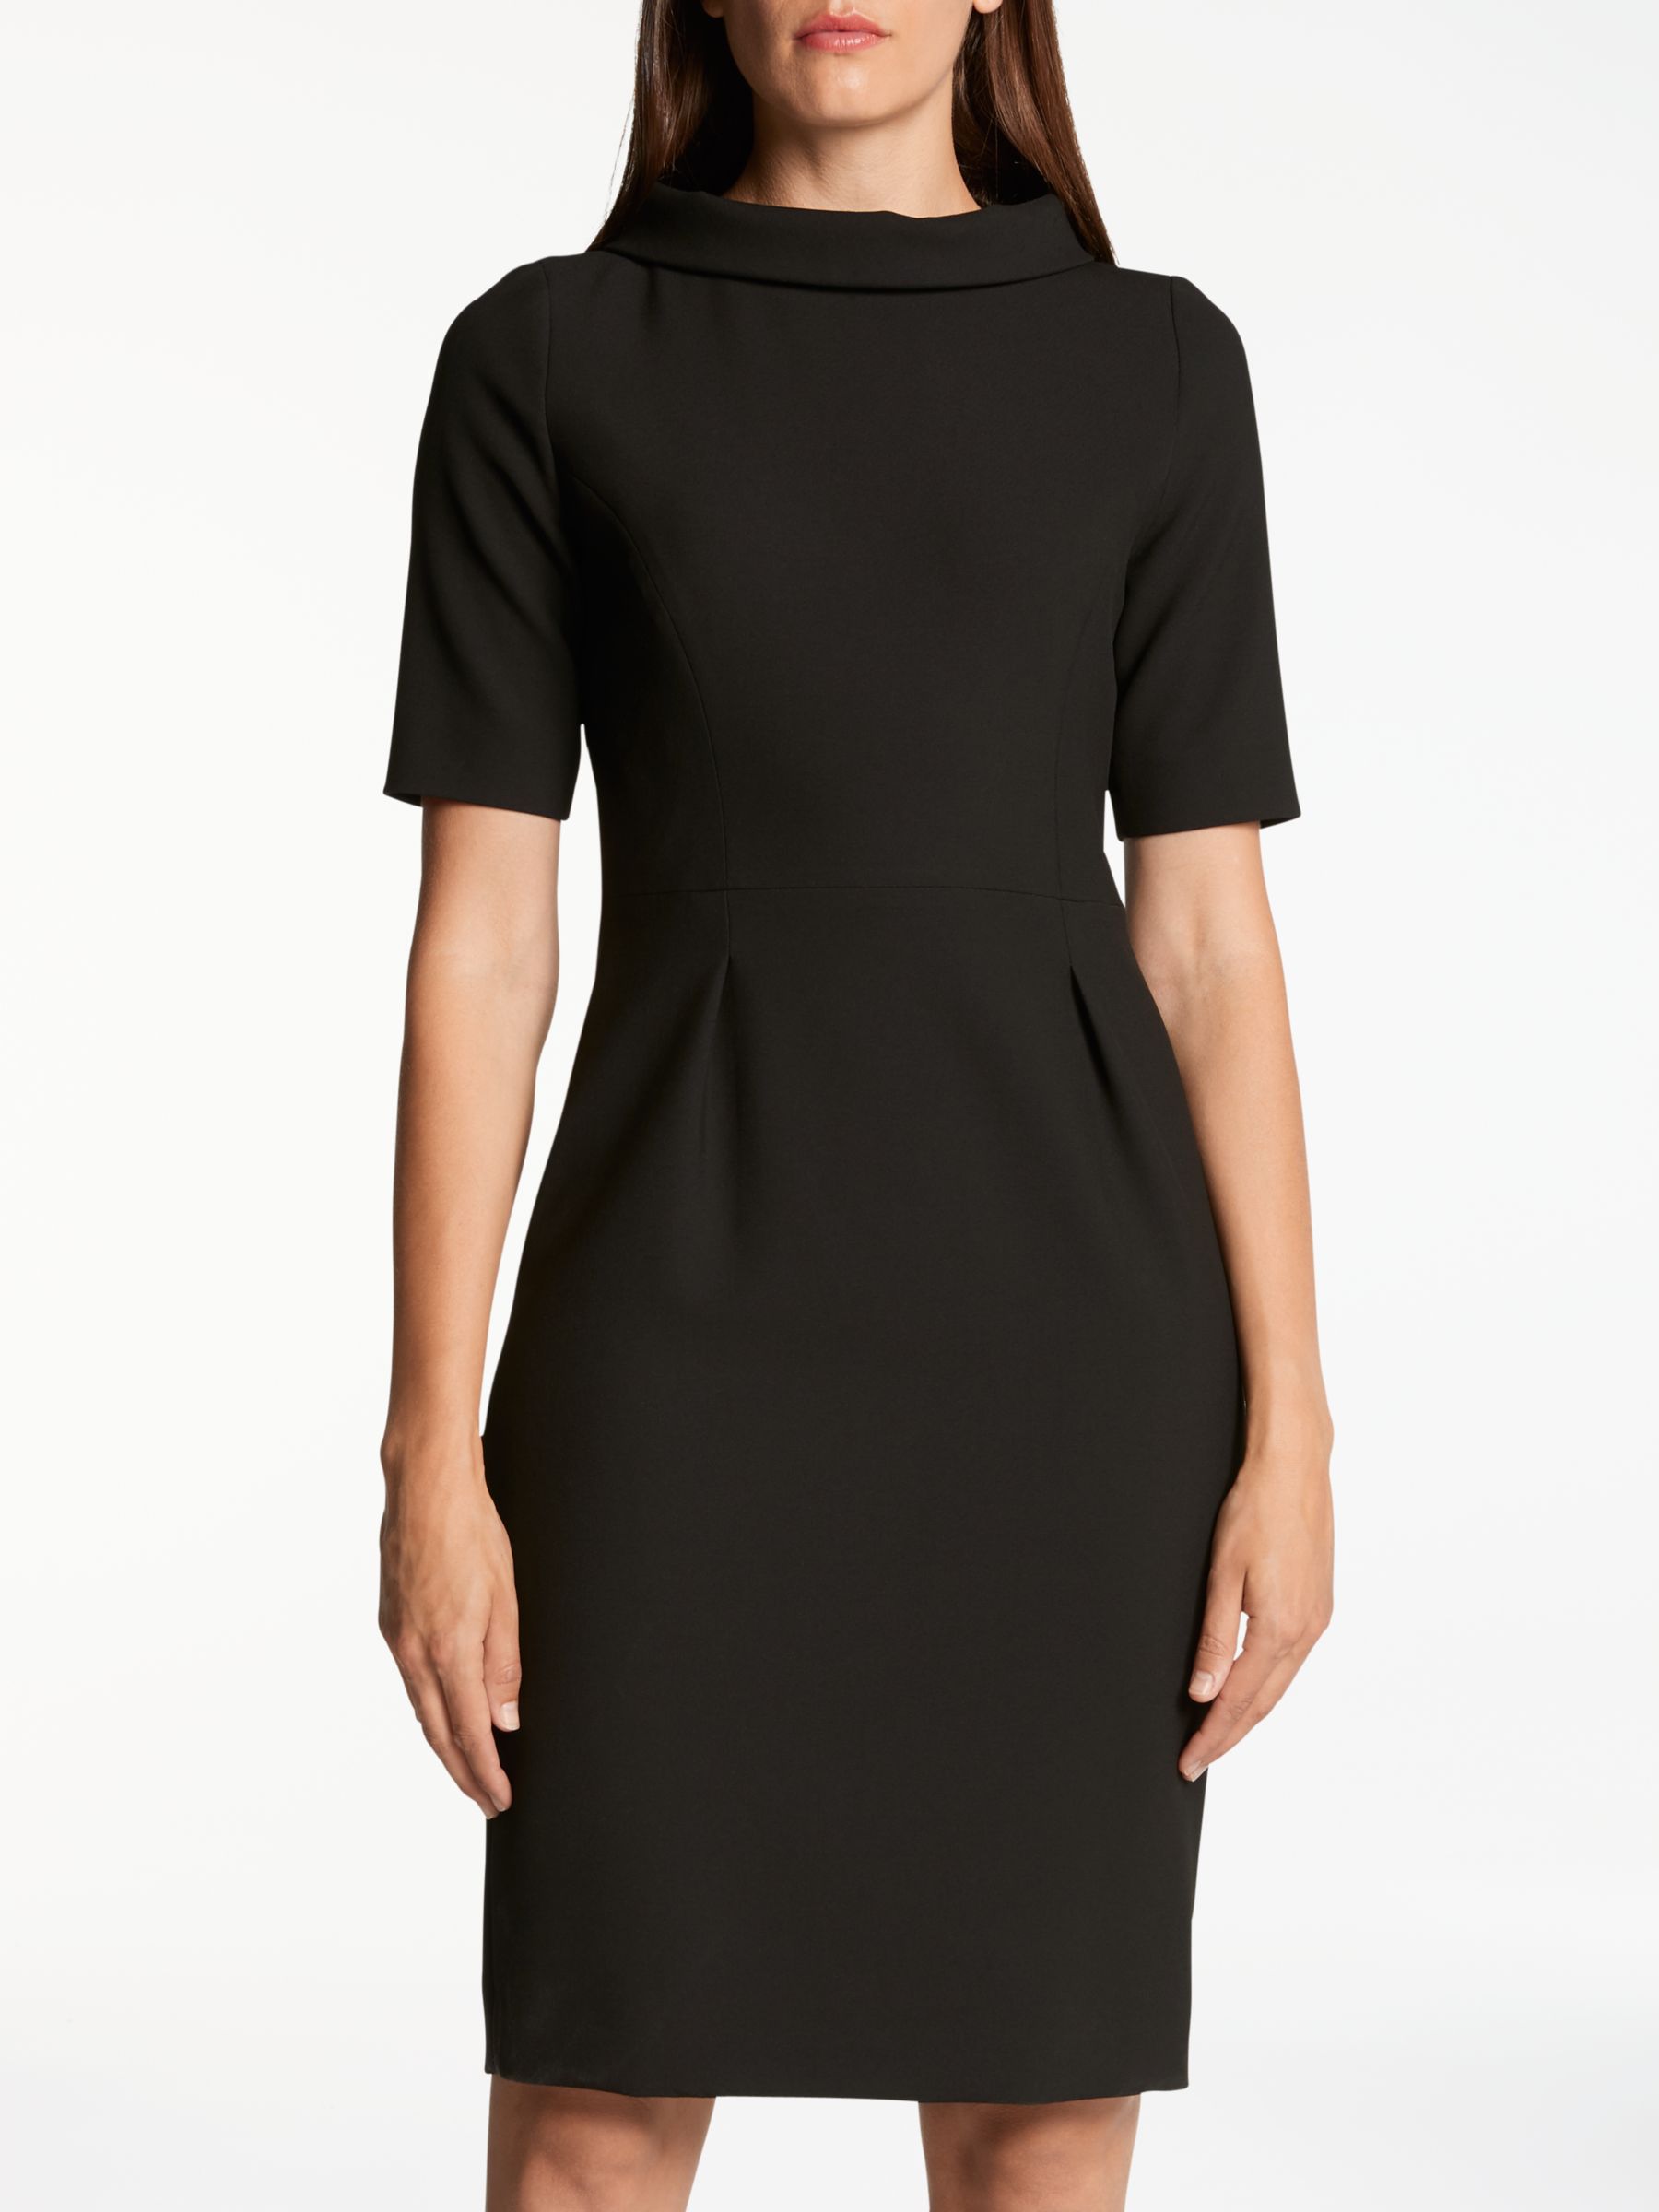 Bruce by Bruce Oldfield Picture Collar Dress, Black, 18